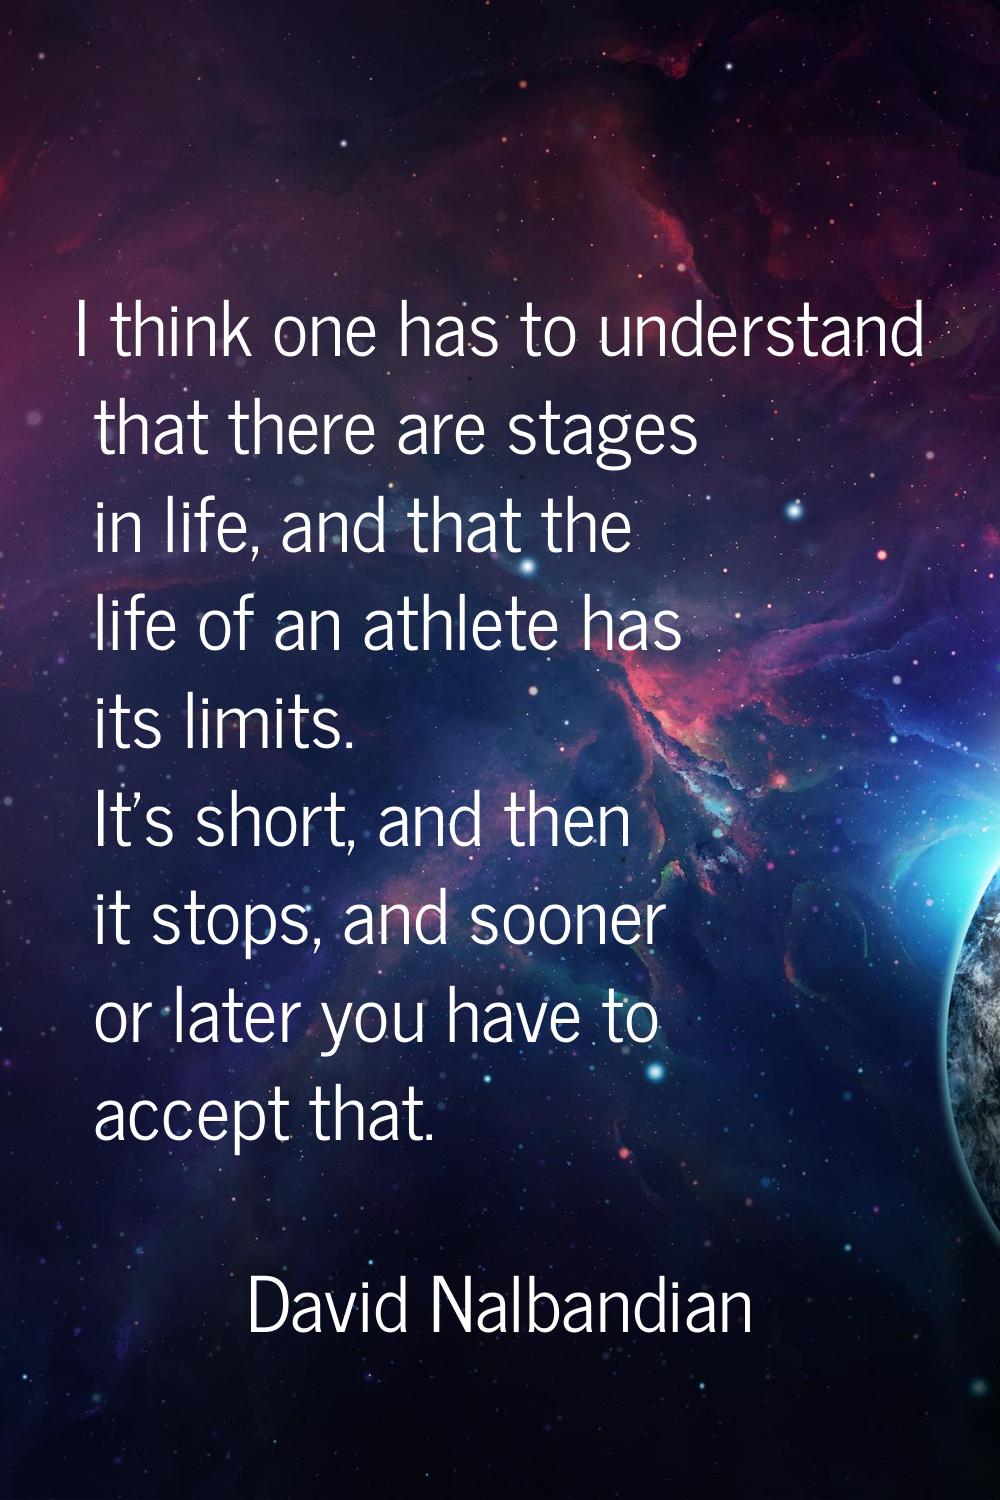 I think one has to understand that there are stages in life, and that the life of an athlete has it